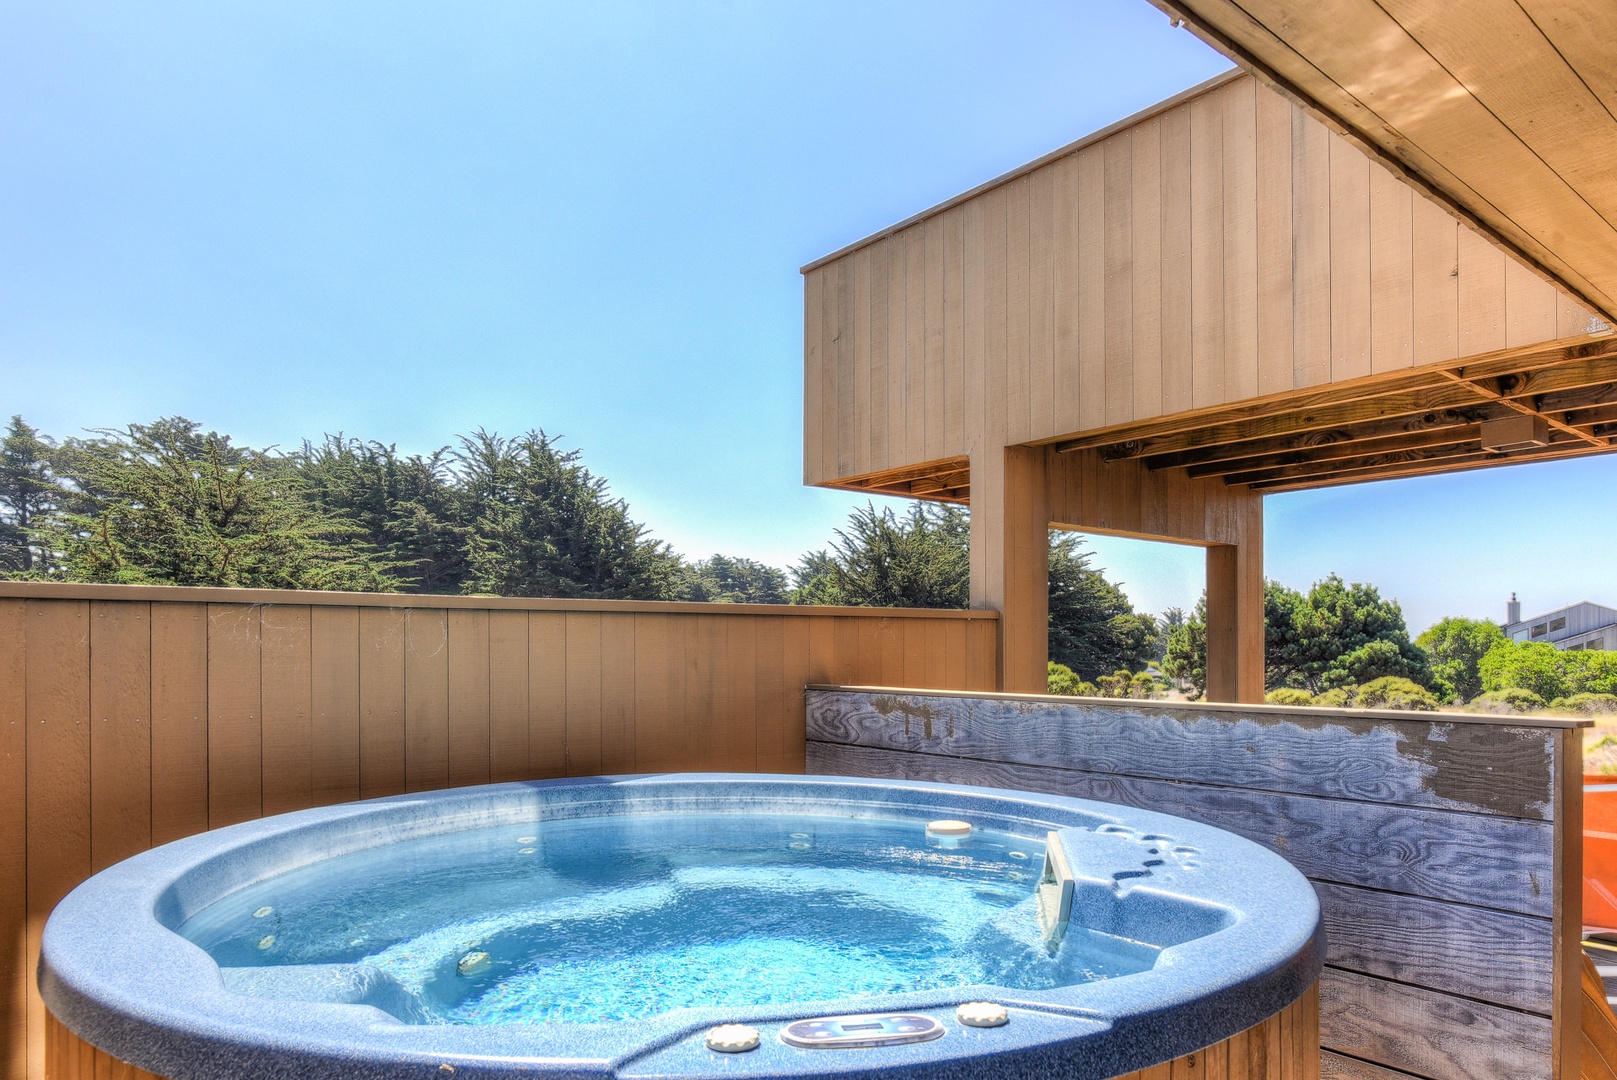 Private hot tub for you and your guests to enjoy